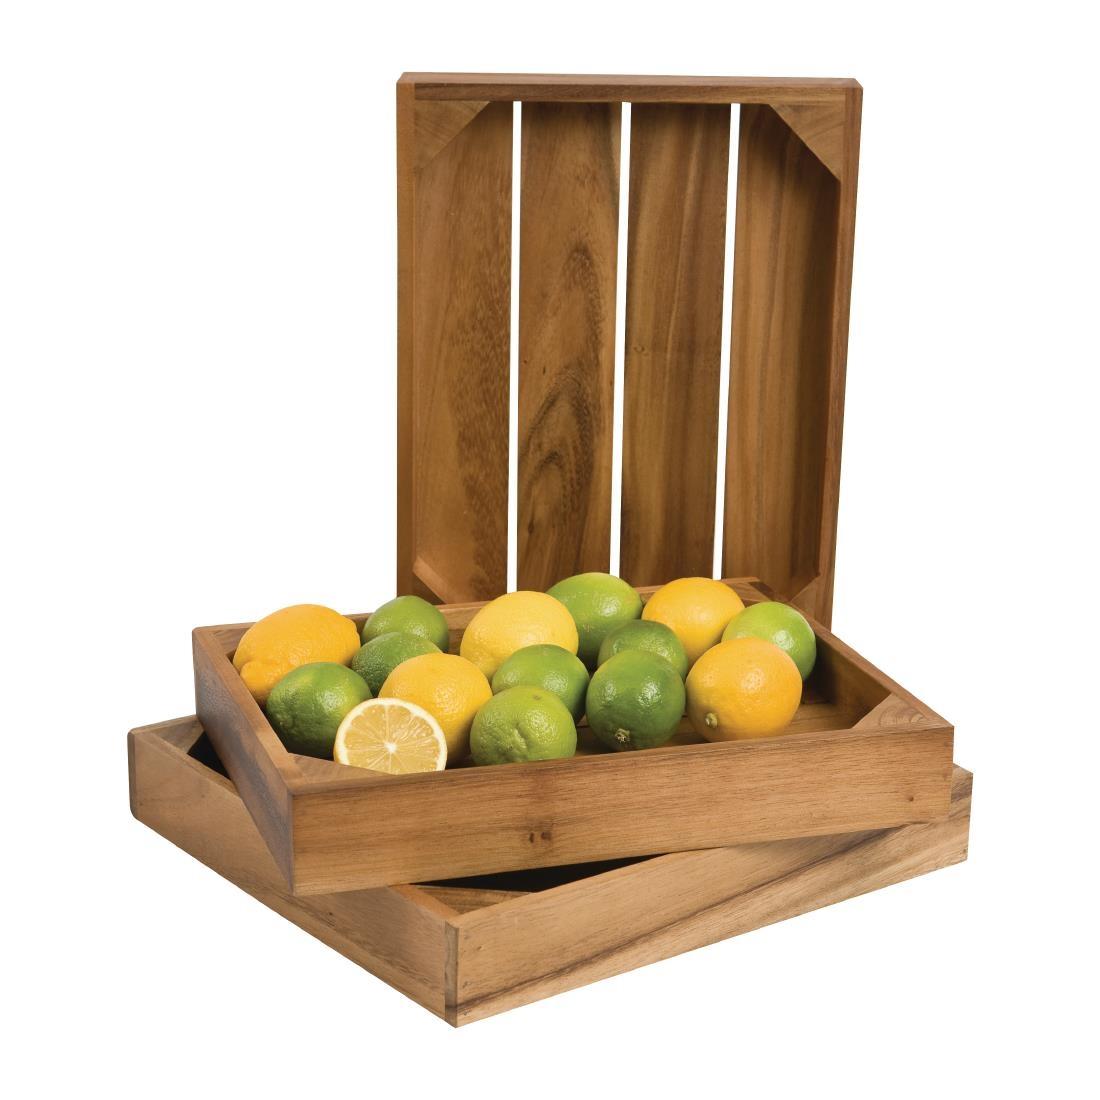 T & G Woodware Display Crate - GF197  - 4